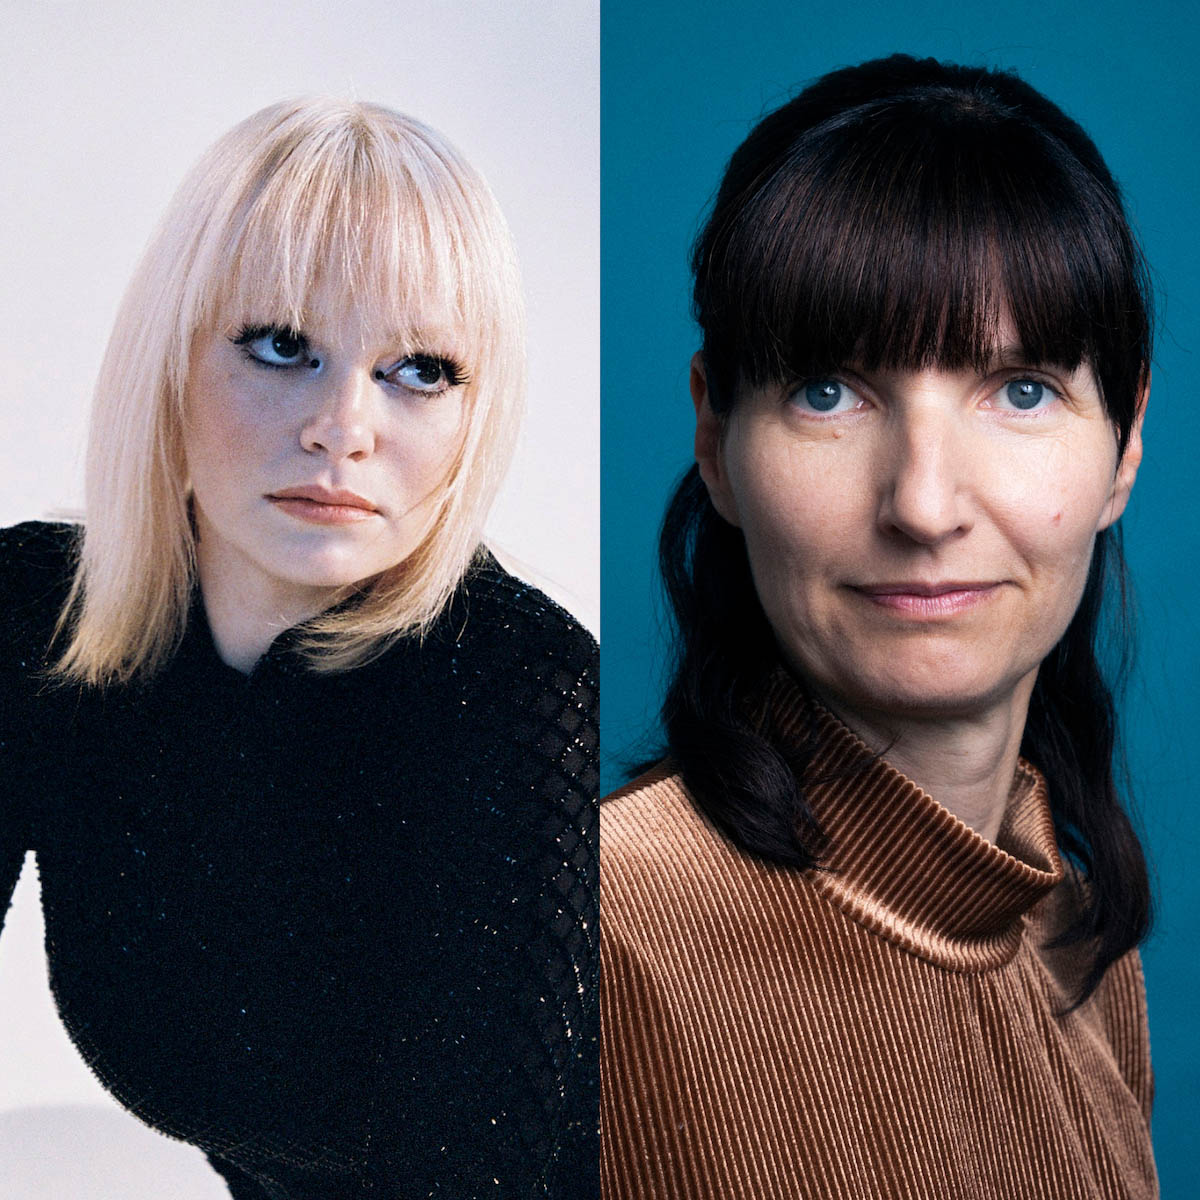 Collage of two pictures, on the right is Uffie, a white woman with blonde shoulder-length hair and fringes. She is looking to the right side of the picture and slightly upwards. She is wearing a black, glittery, skin-tight dress with long sleeves. On the right is Sonja Eismann, a white woman with brown fringes and shoulder-length hair. She looks into the camera with piercing blue eyes. The background is also blue. She is wearing a bronze-coloured top with a high collar.